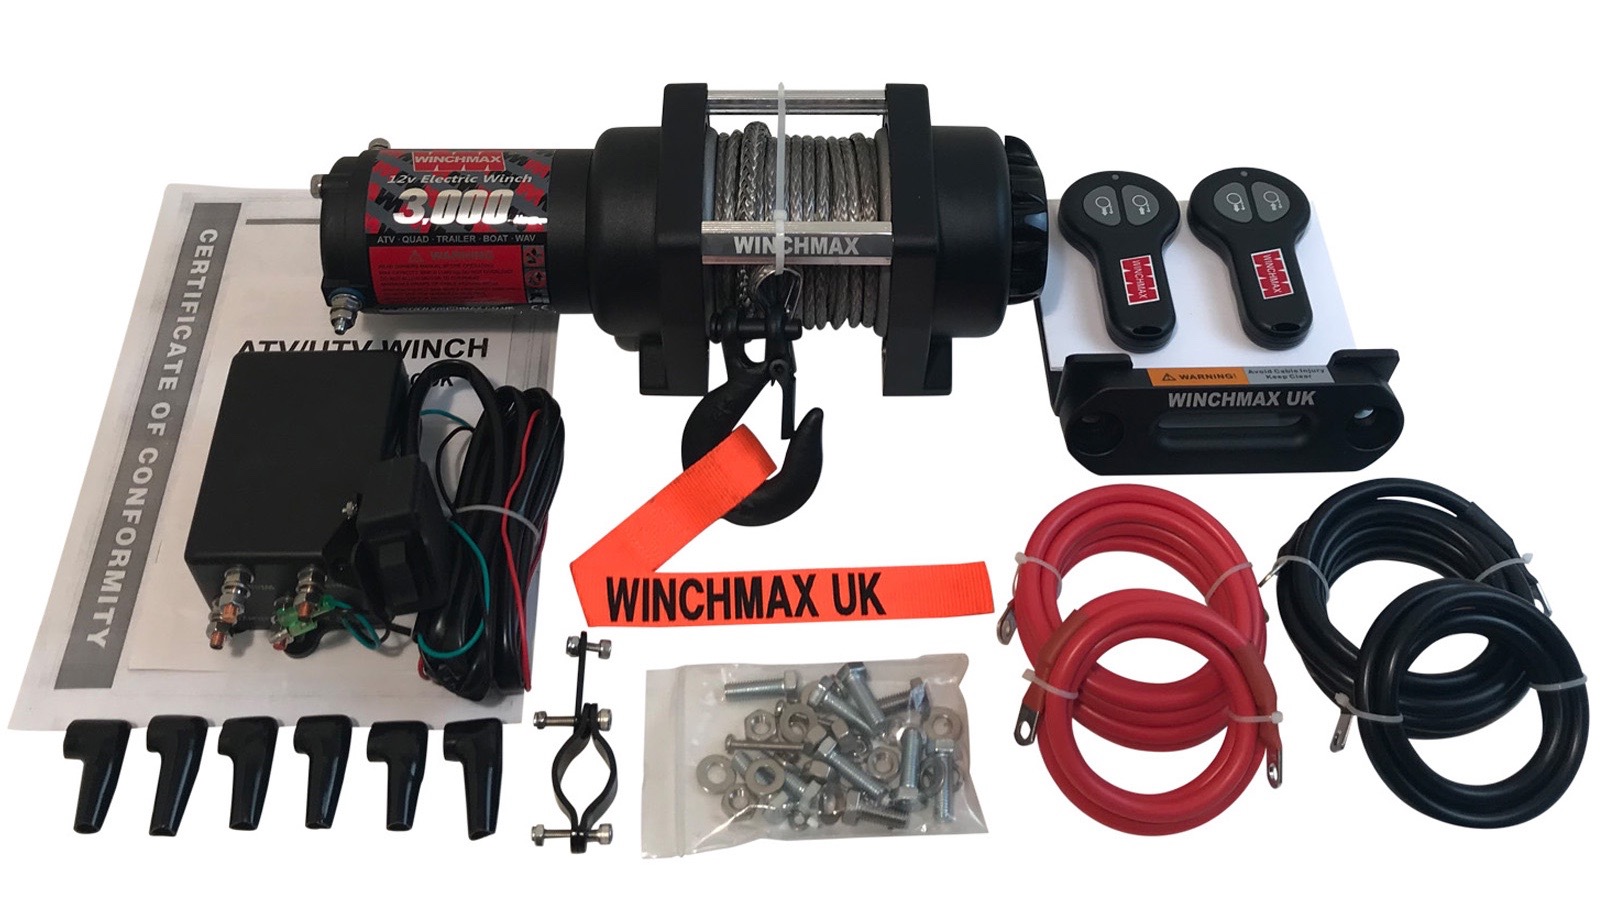 product_view.php?pid=MIL SPEC ATV 3000 24V ELECTRIC WINCH DYNEEMA ROPE